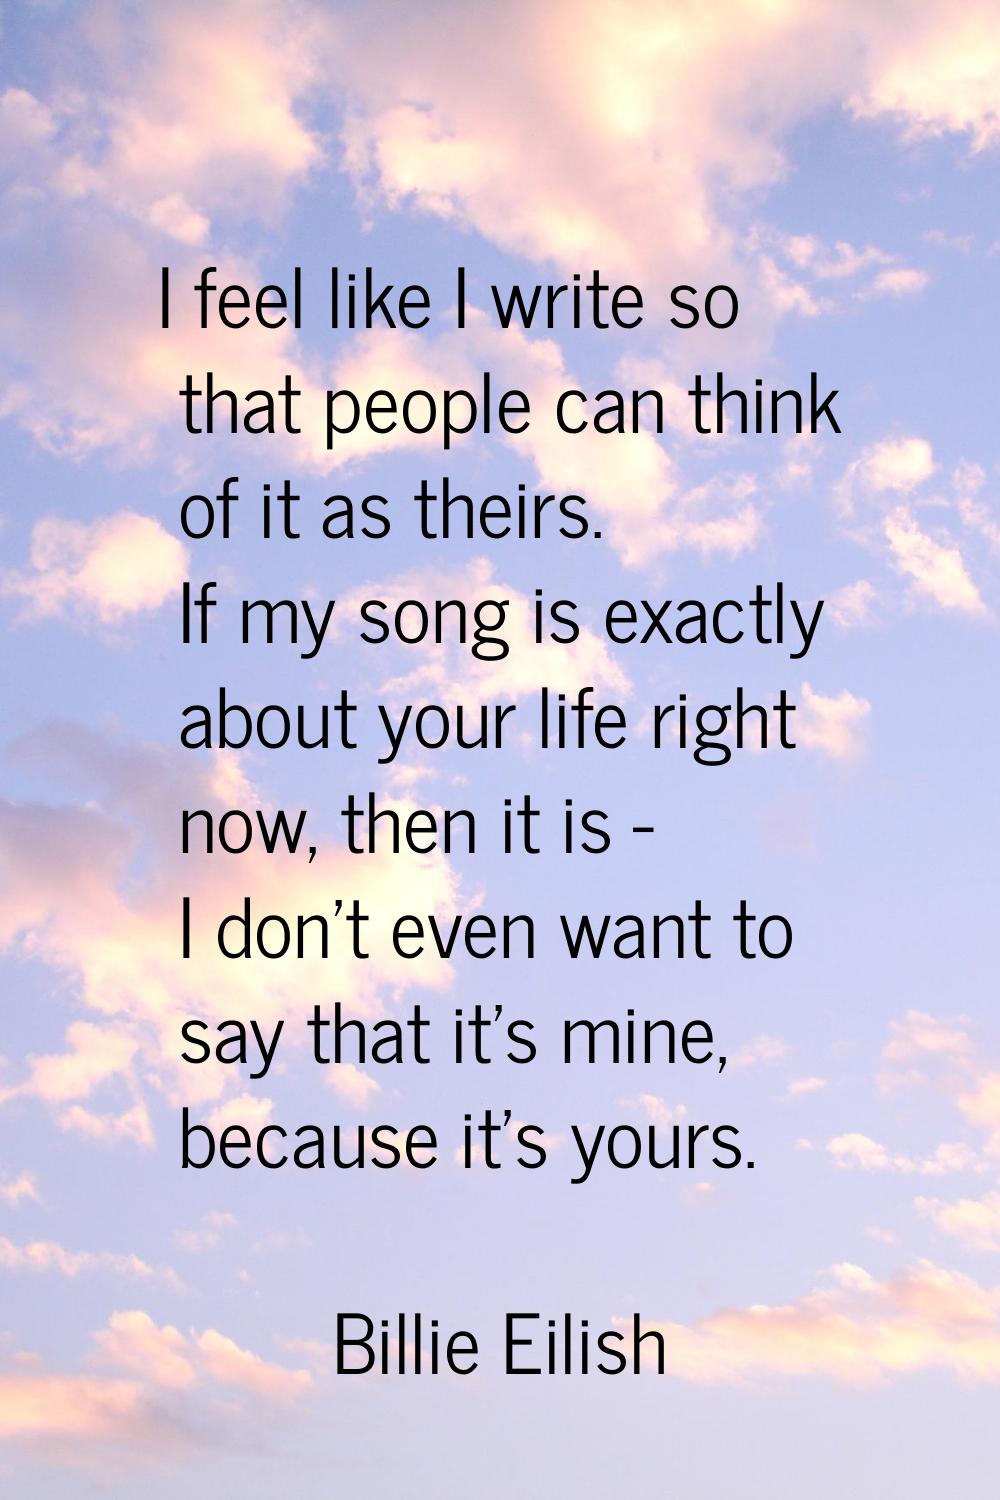 I feel like I write so that people can think of it as theirs. If my song is exactly about your life